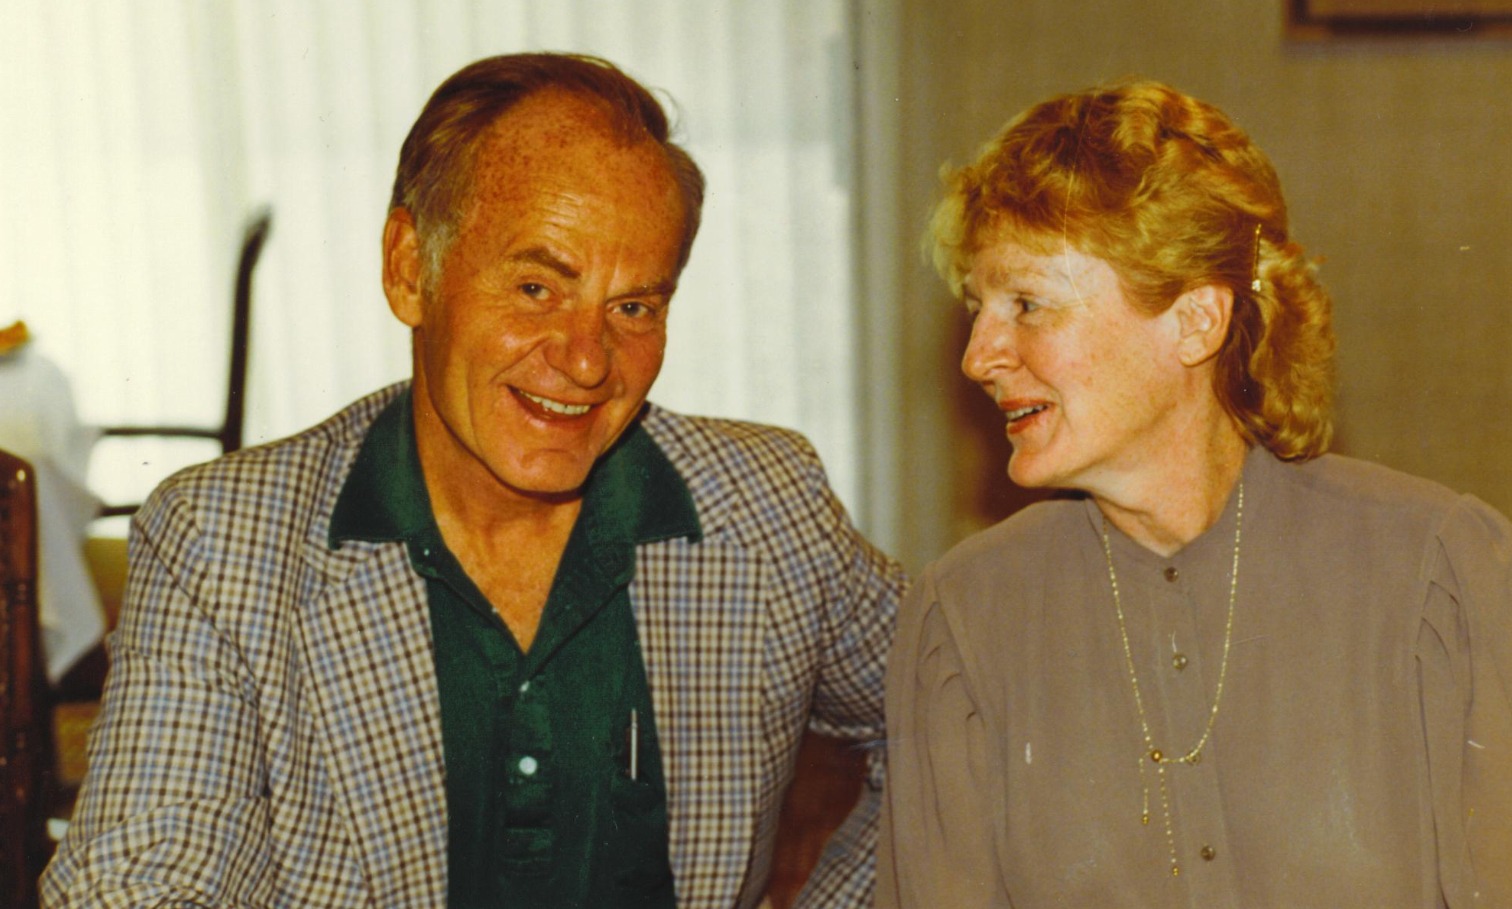 Nancy Geisse Falls and her brother John F. Geisse, 1983